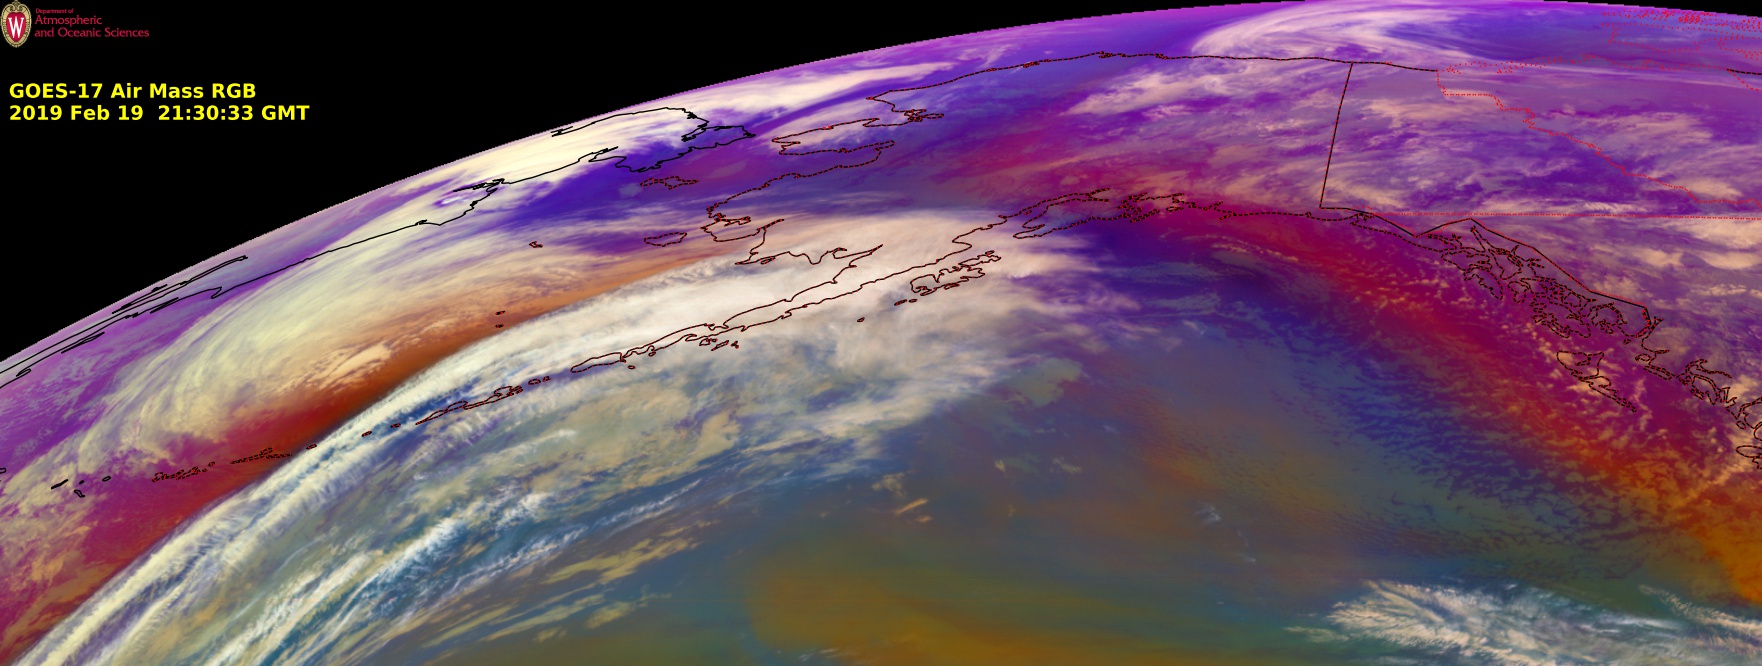 GOES-17 Air Mass RGB images [click to play animation | MP4]